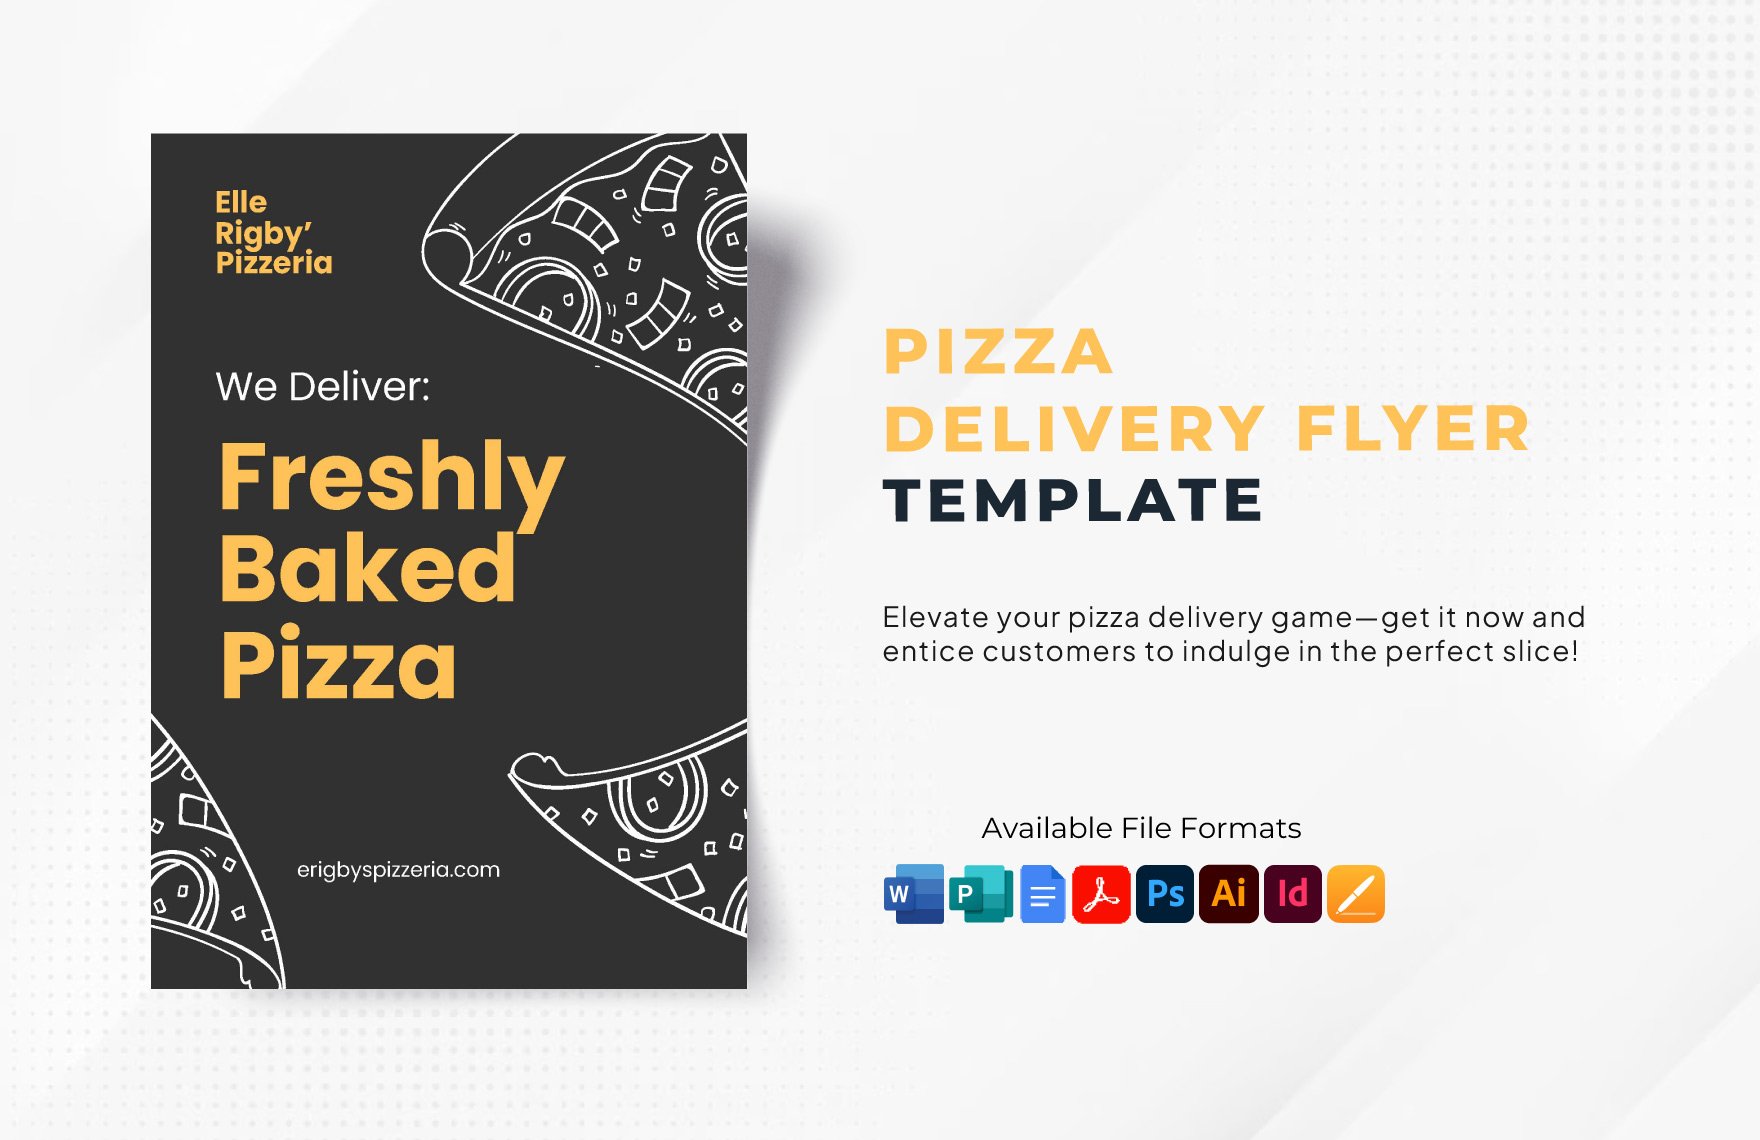 Pizza Delivery Flyer Template in Word, Google Docs, PDF, Illustrator, PSD, Apple Pages, Publisher